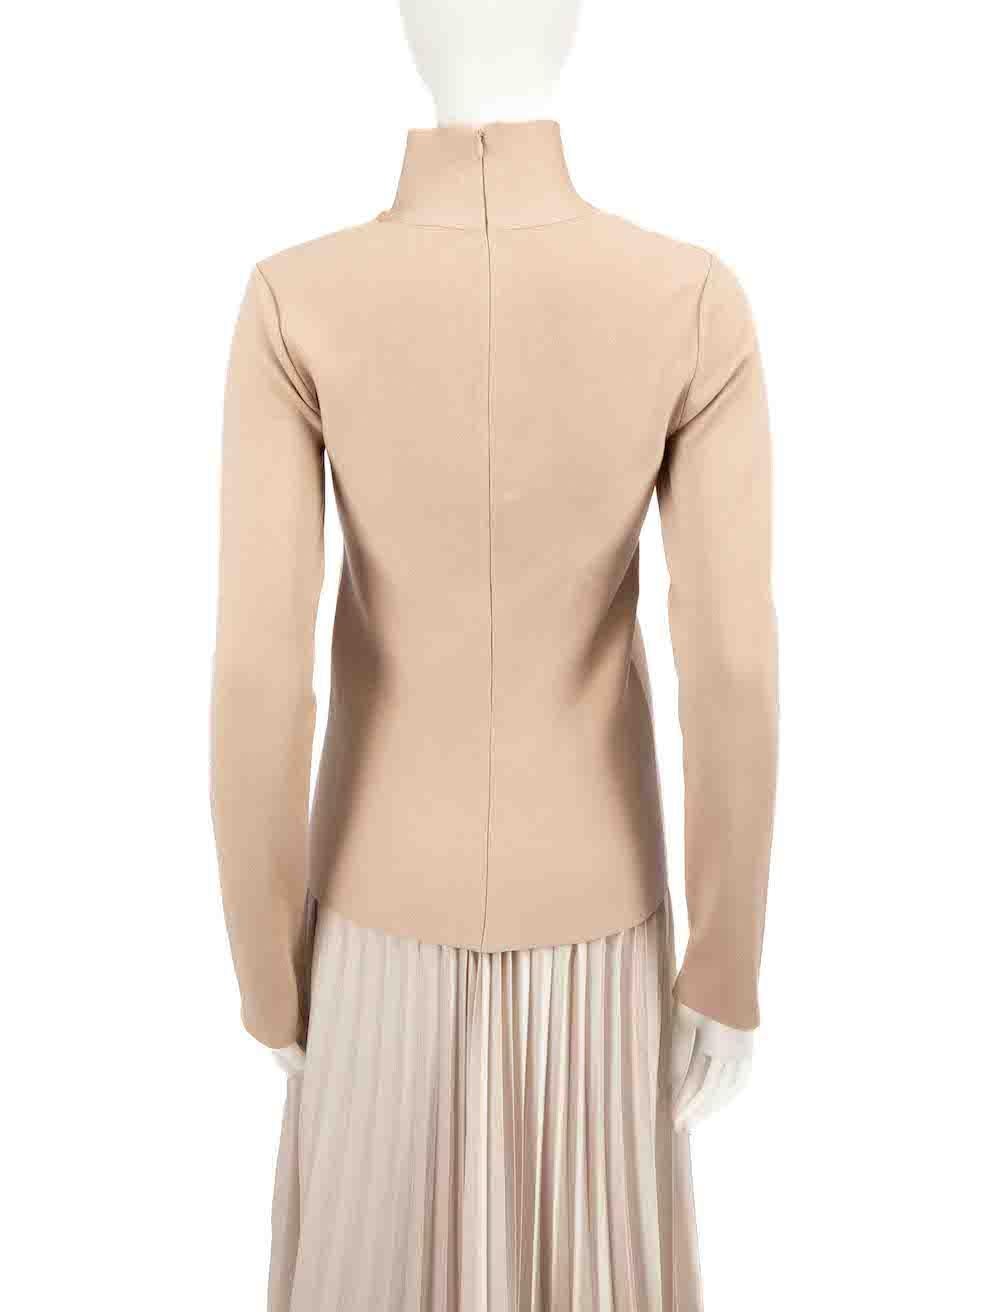 Céline Beige Turtleneck Knit Top Size S In Excellent Condition For Sale In London, GB